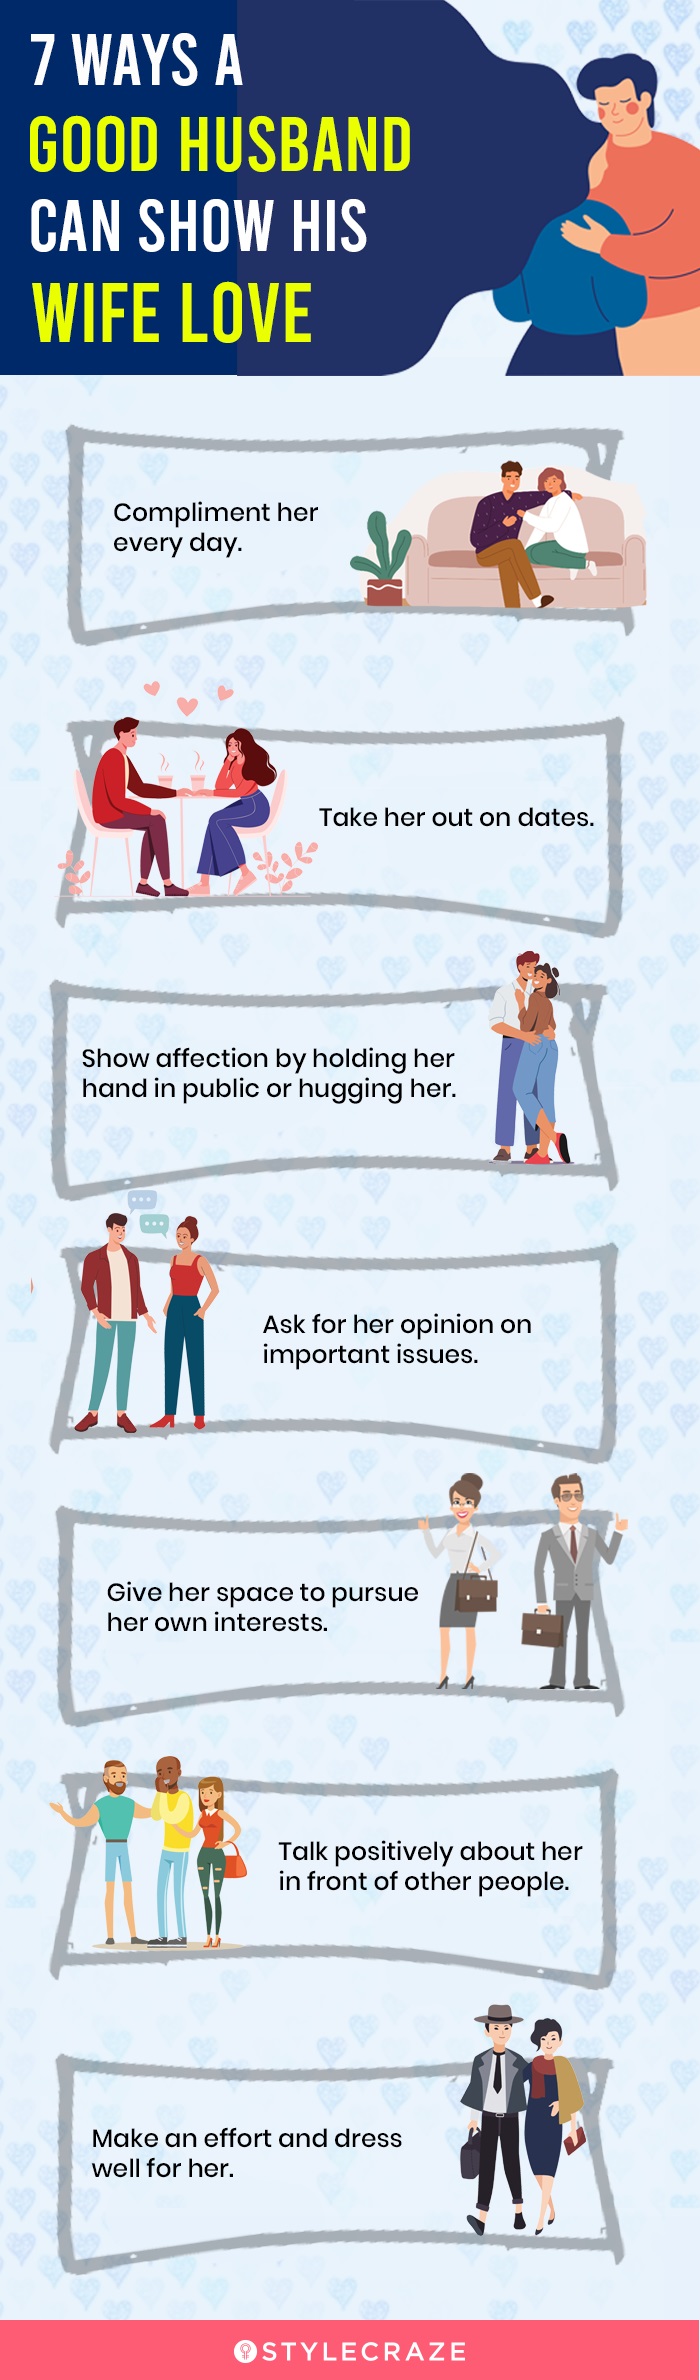 7 ways a good husband can show his wife love [infographic]